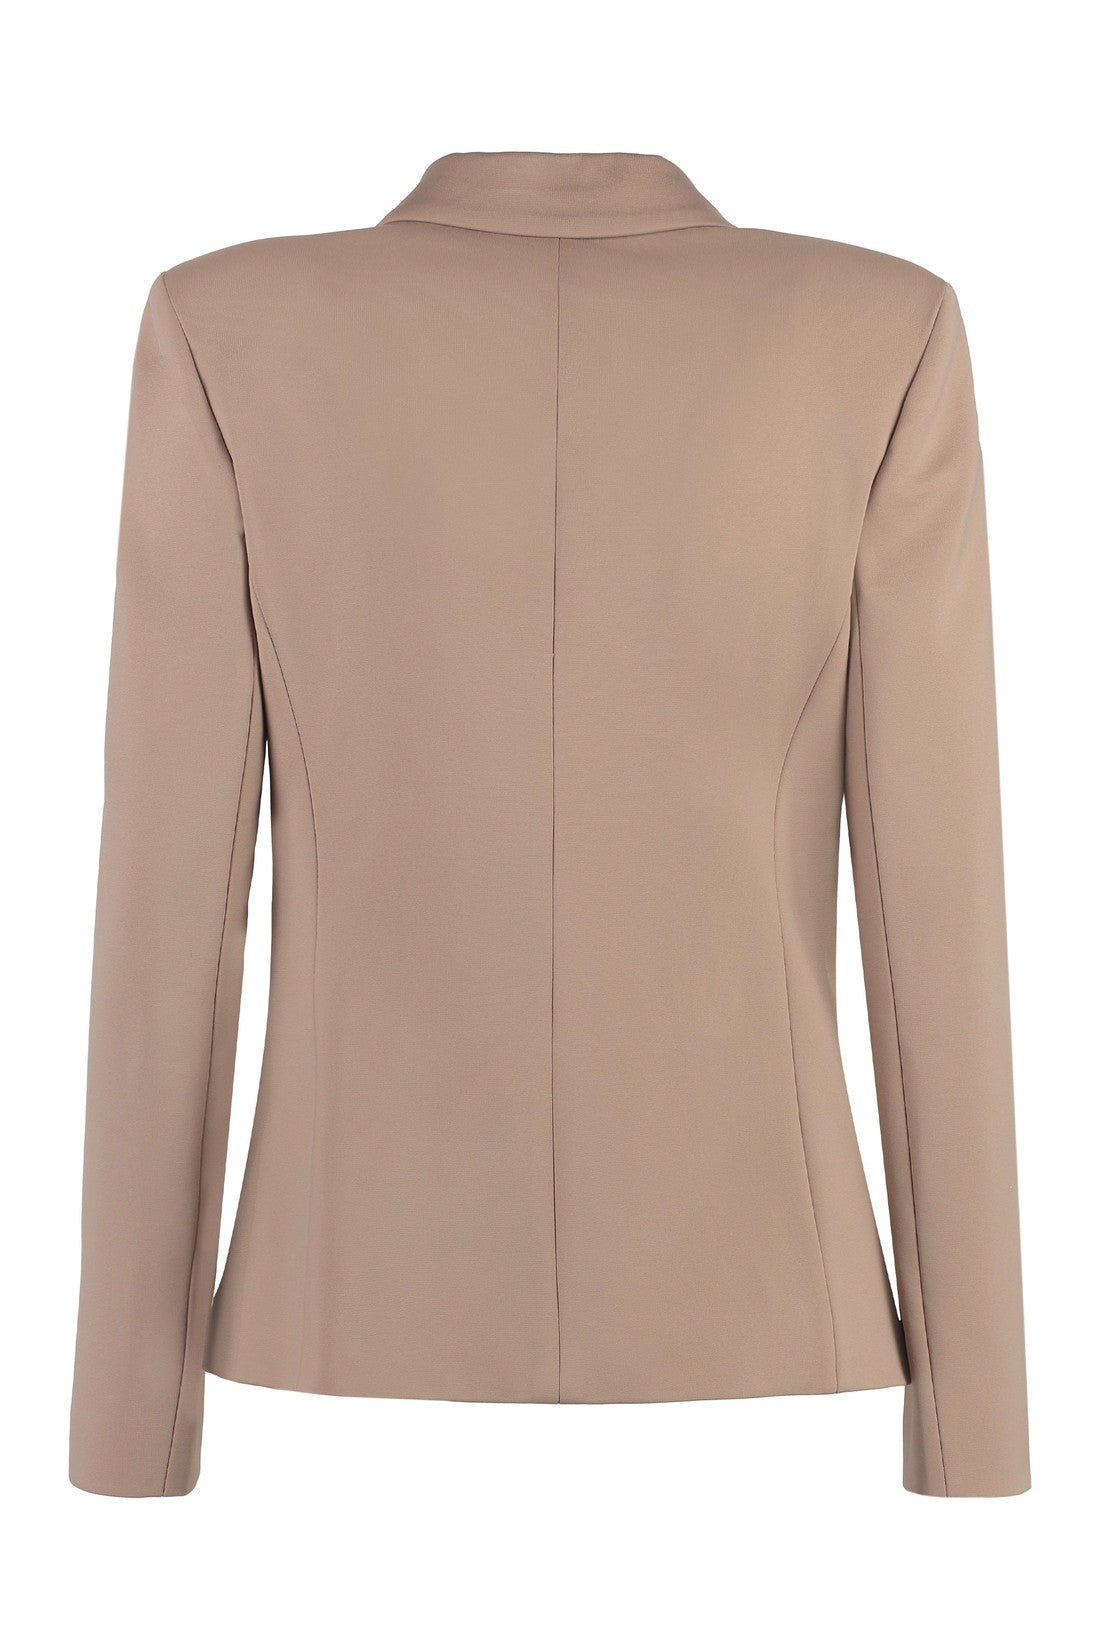 Pinko-OUTLET-SALE-Alexia double breasted blazer-ARCHIVIST